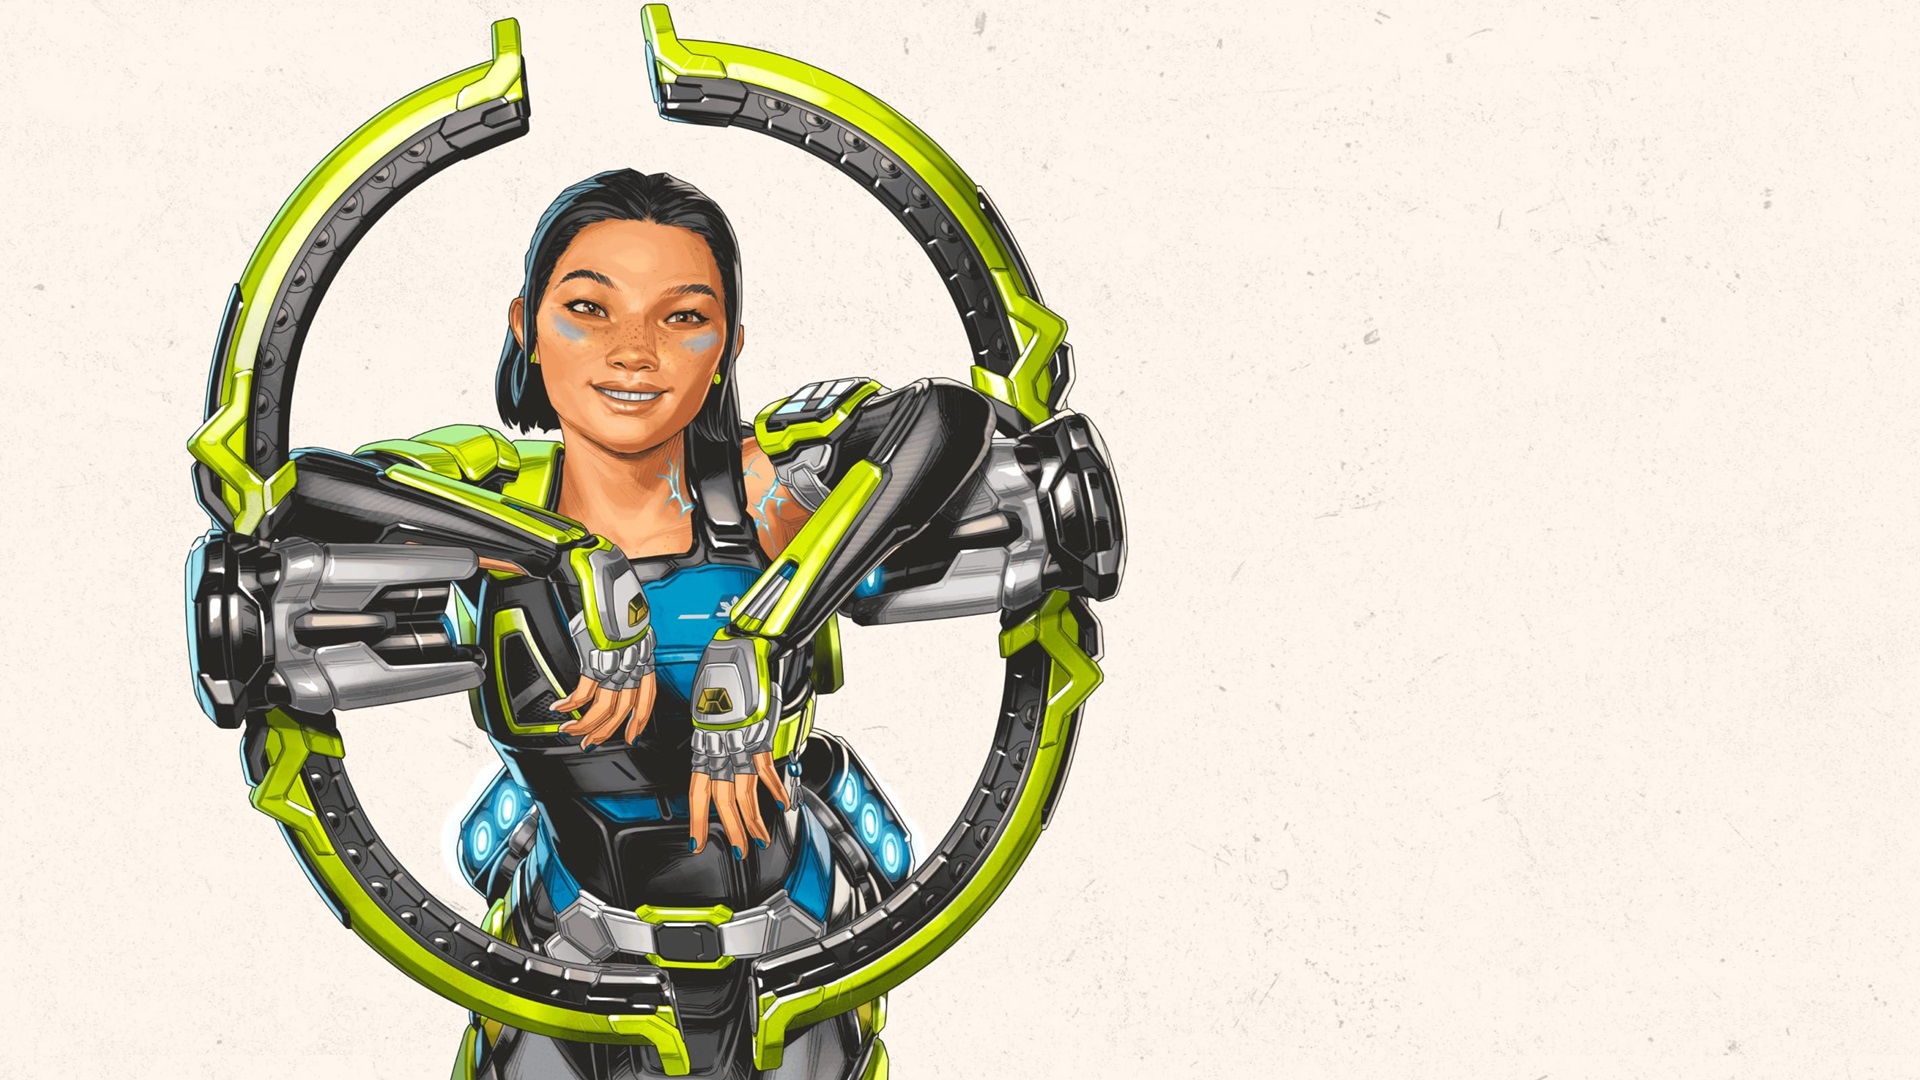 Apex Legends characters and abilities list